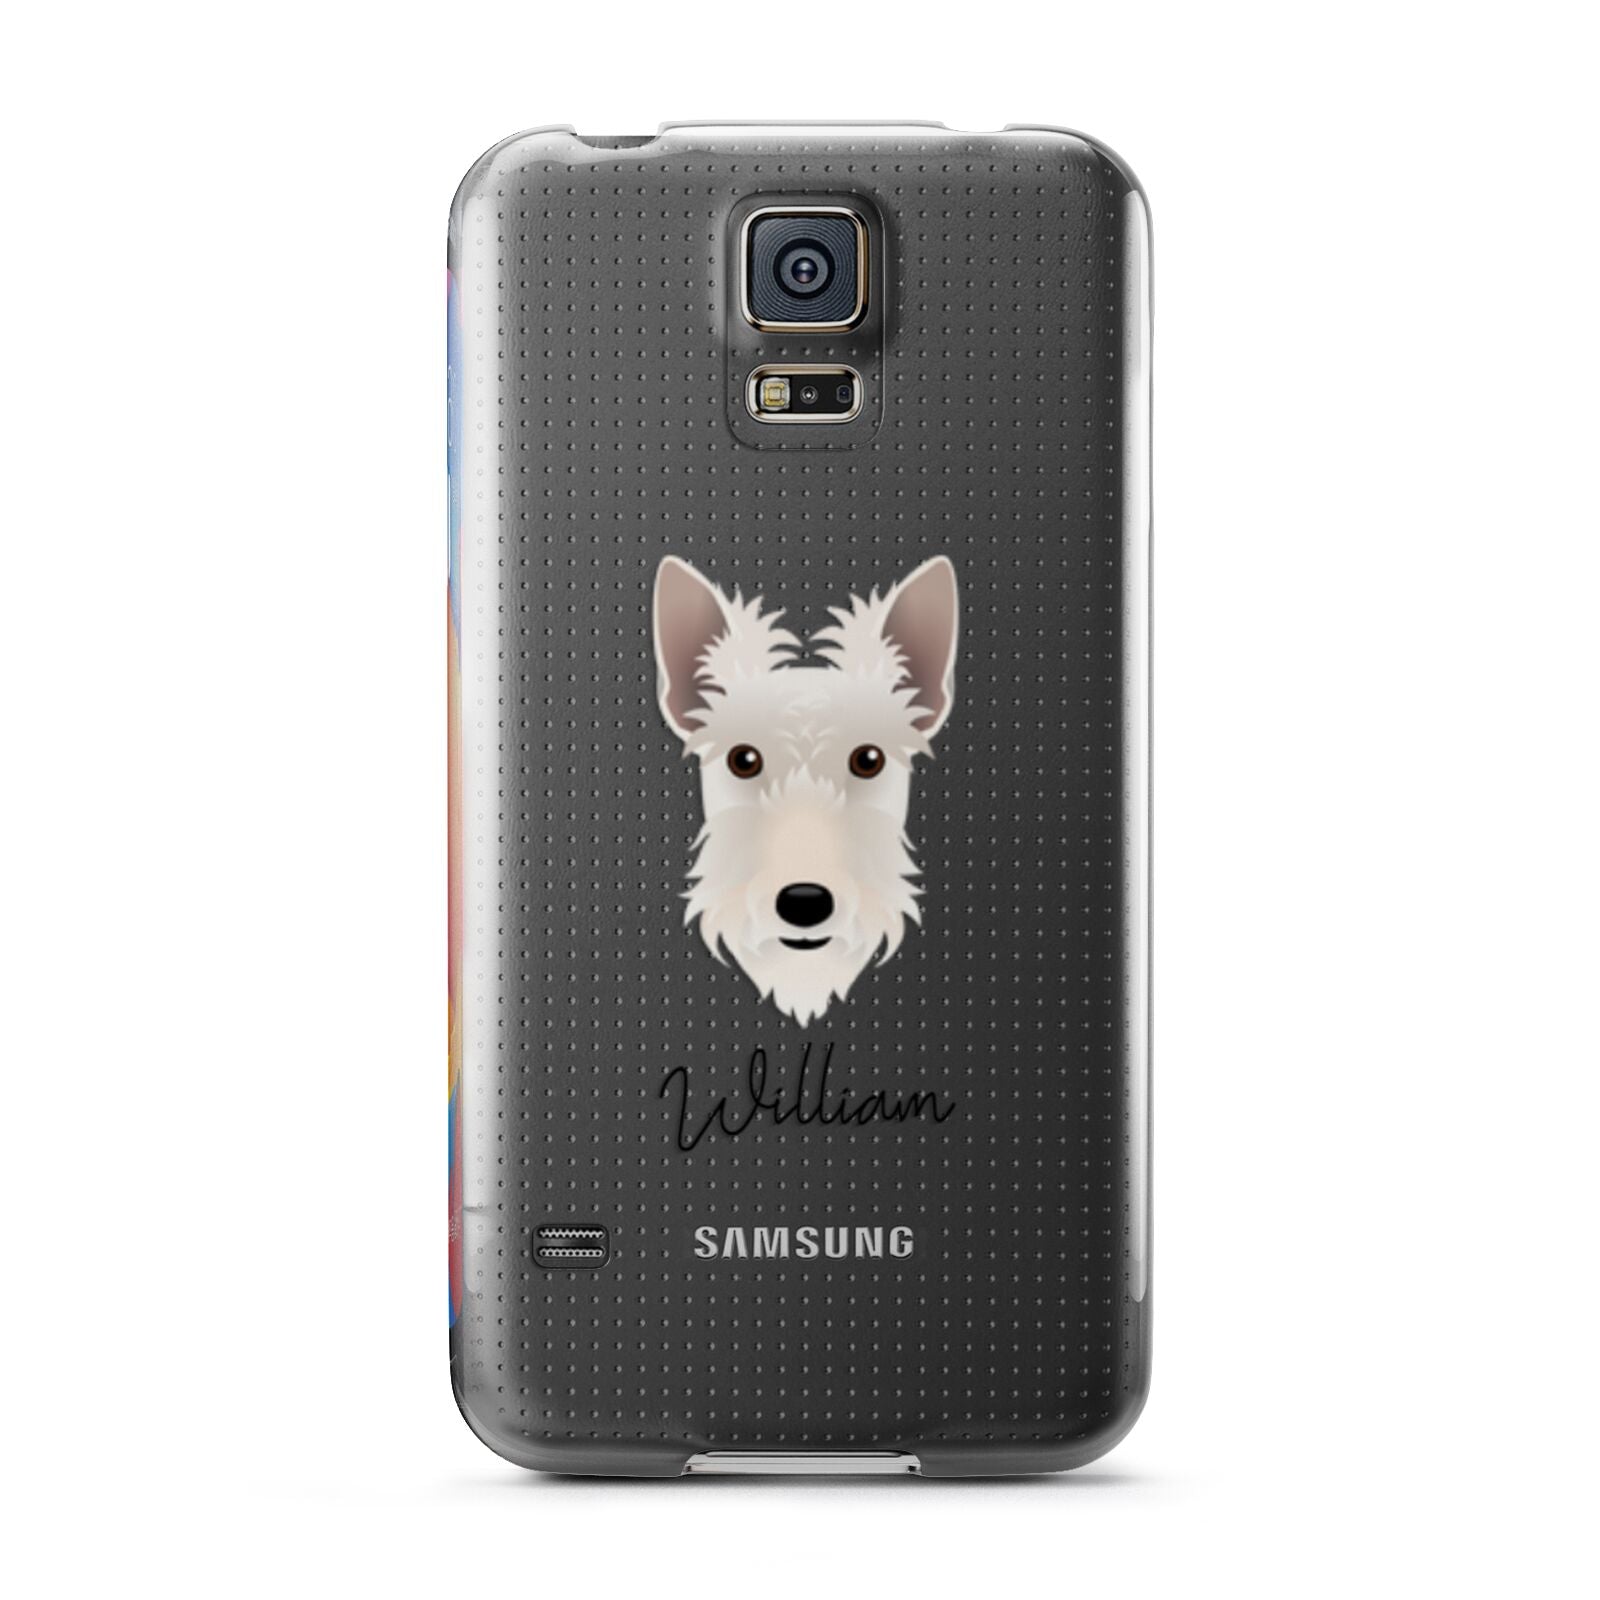 Scottish Terrier Personalised Samsung Galaxy S5 Case